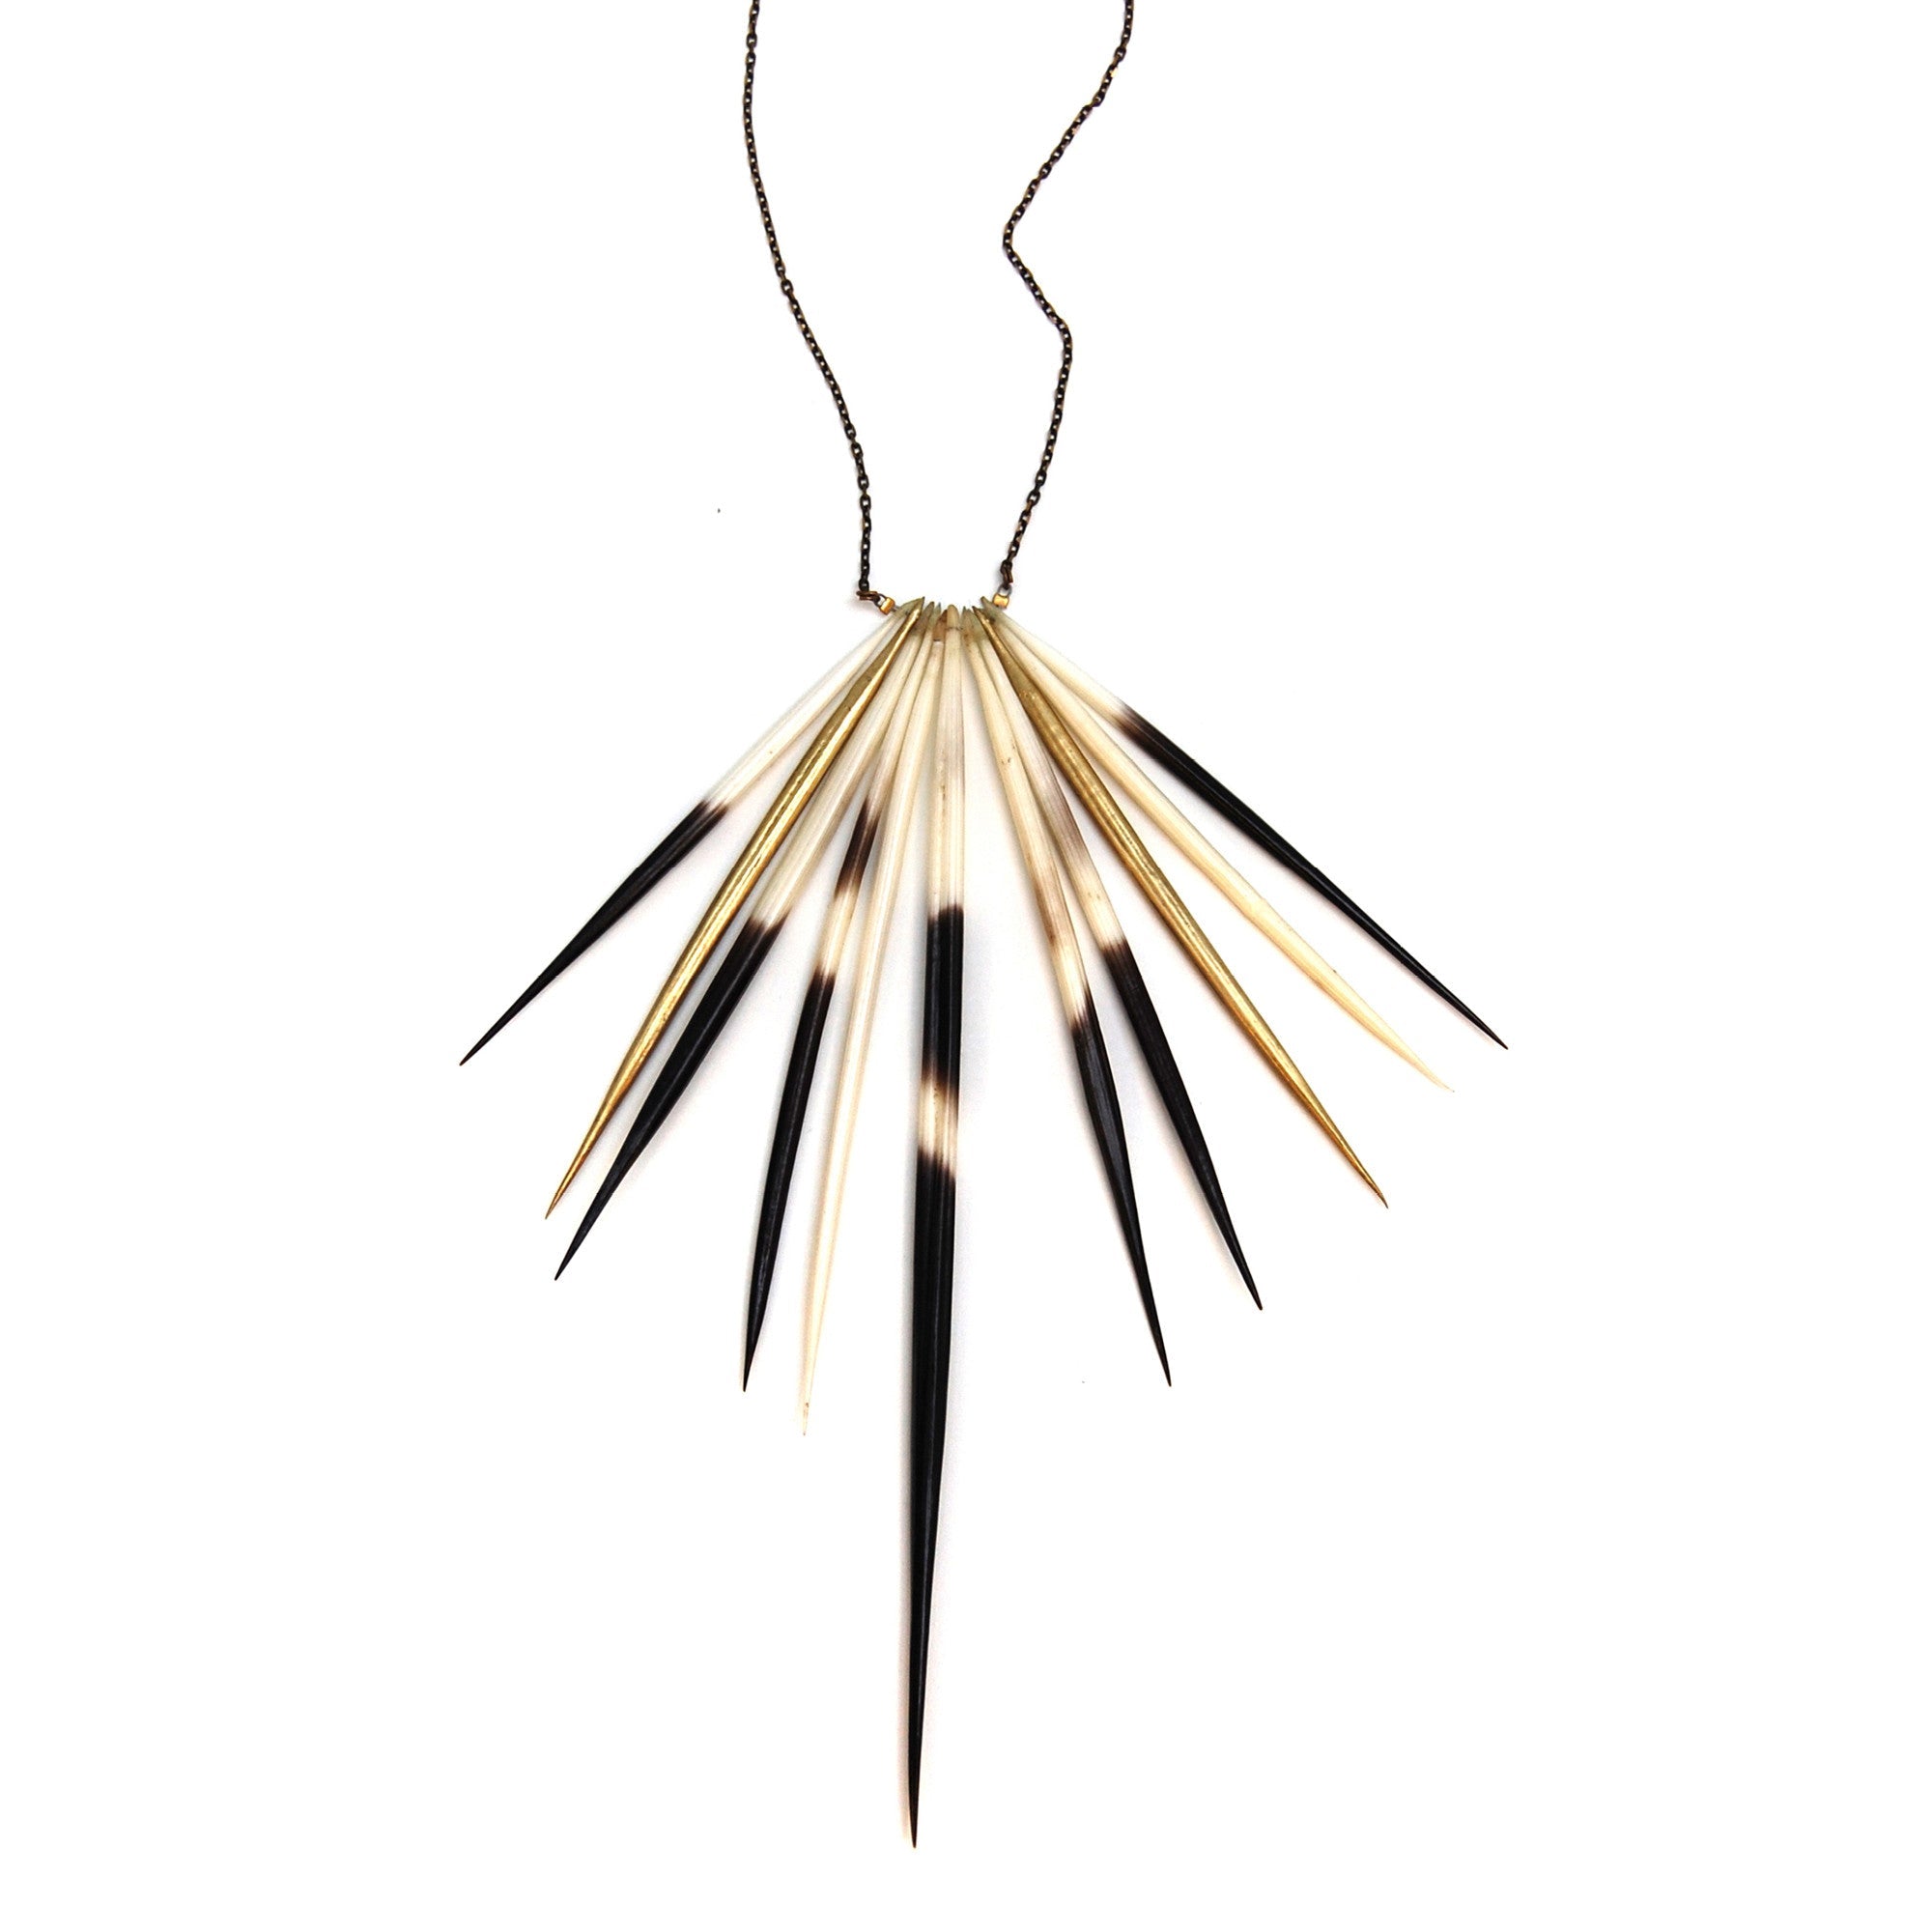 Porcupine Quill/Brass Quill Bib Necklace